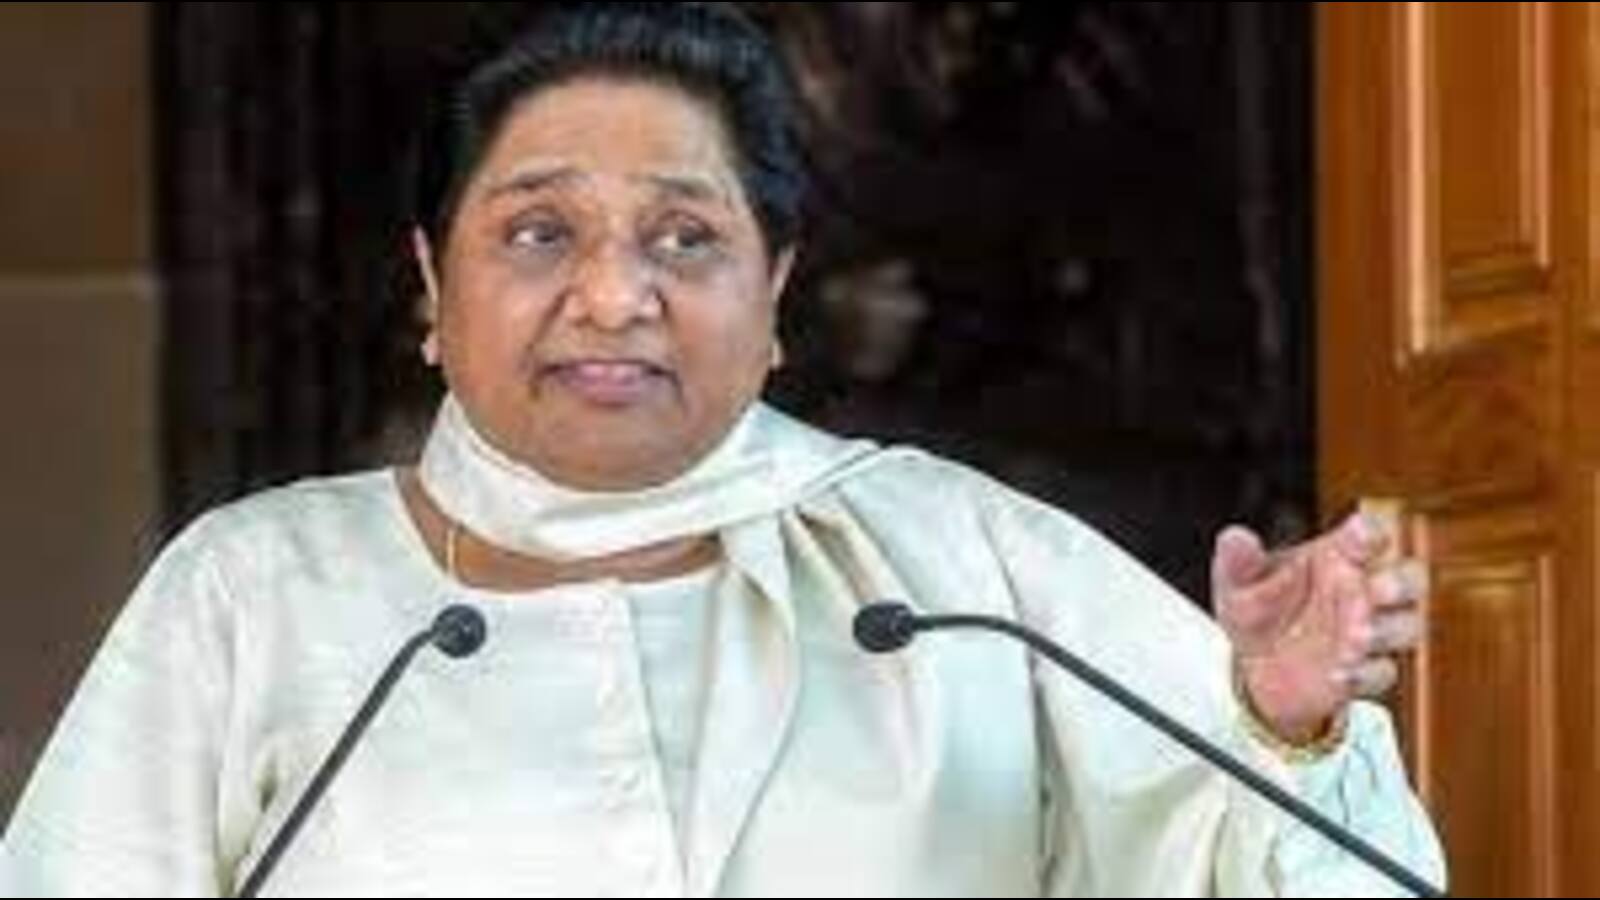 BSP gears up party cadre for municipal polls in U.P.